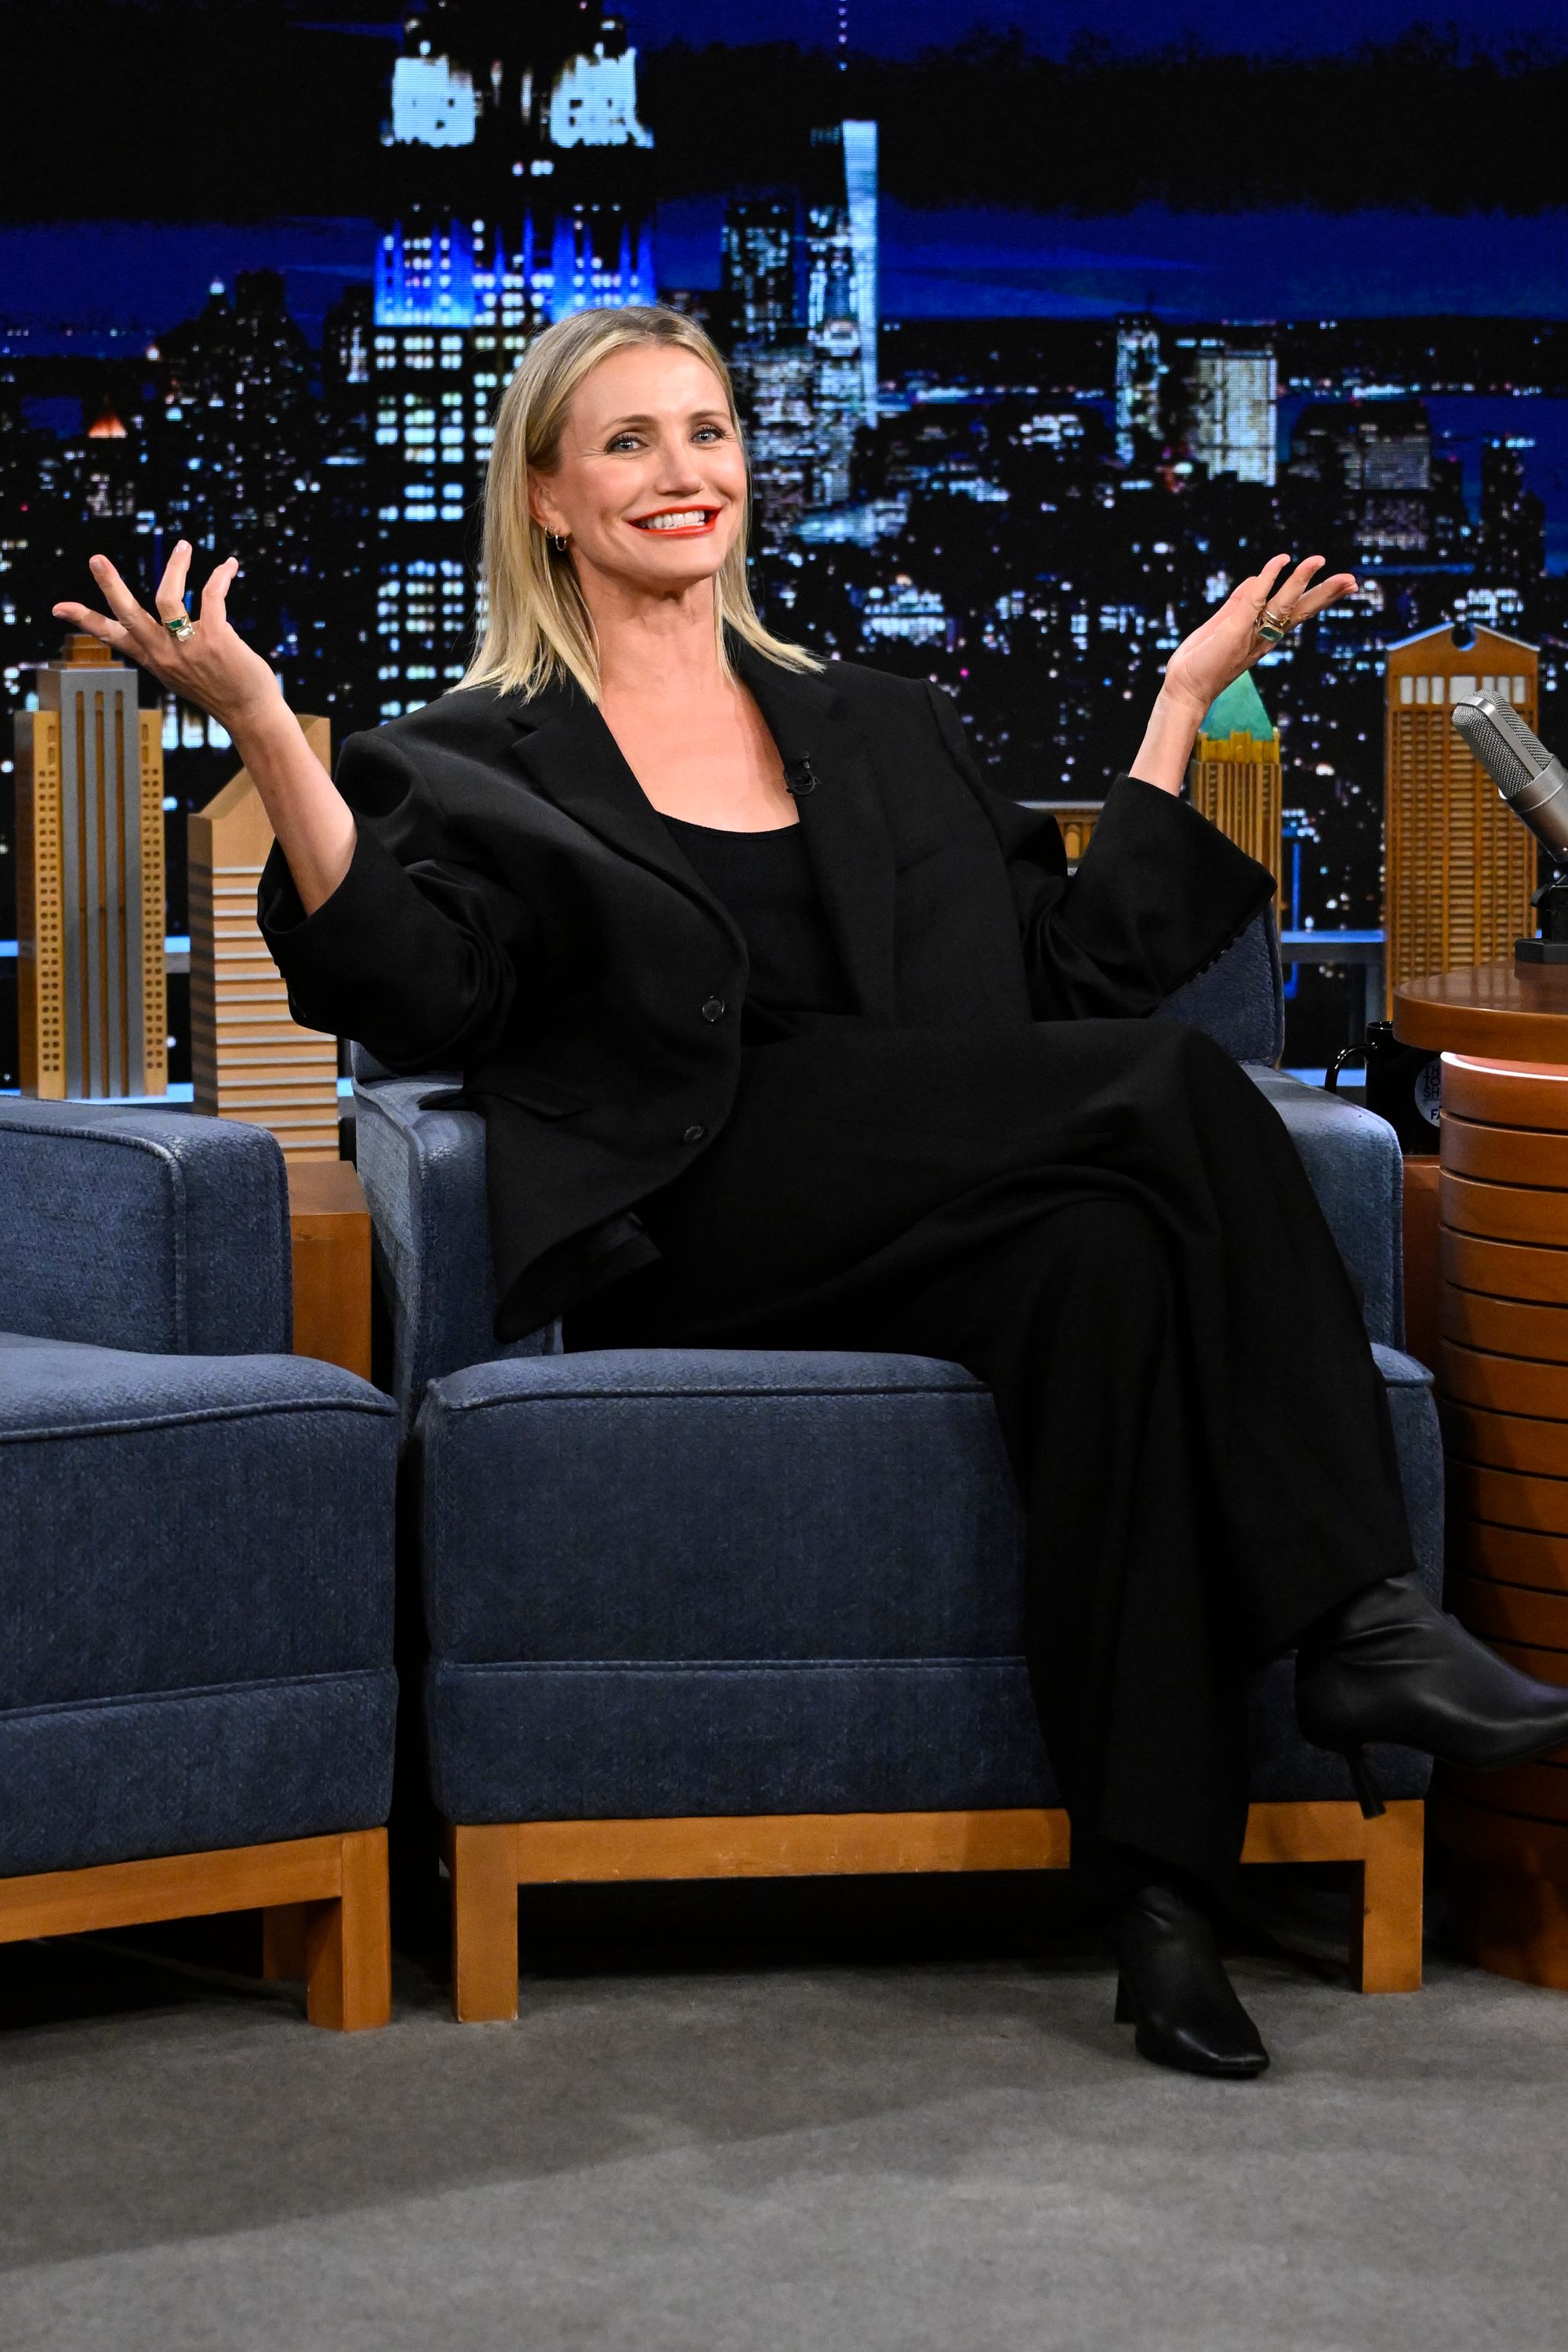 Cameron Diaz during an interview on "The Tonight Show Starring Jimmy Fallon" - Season 11, October 25, 2023. | Source: Getty Images